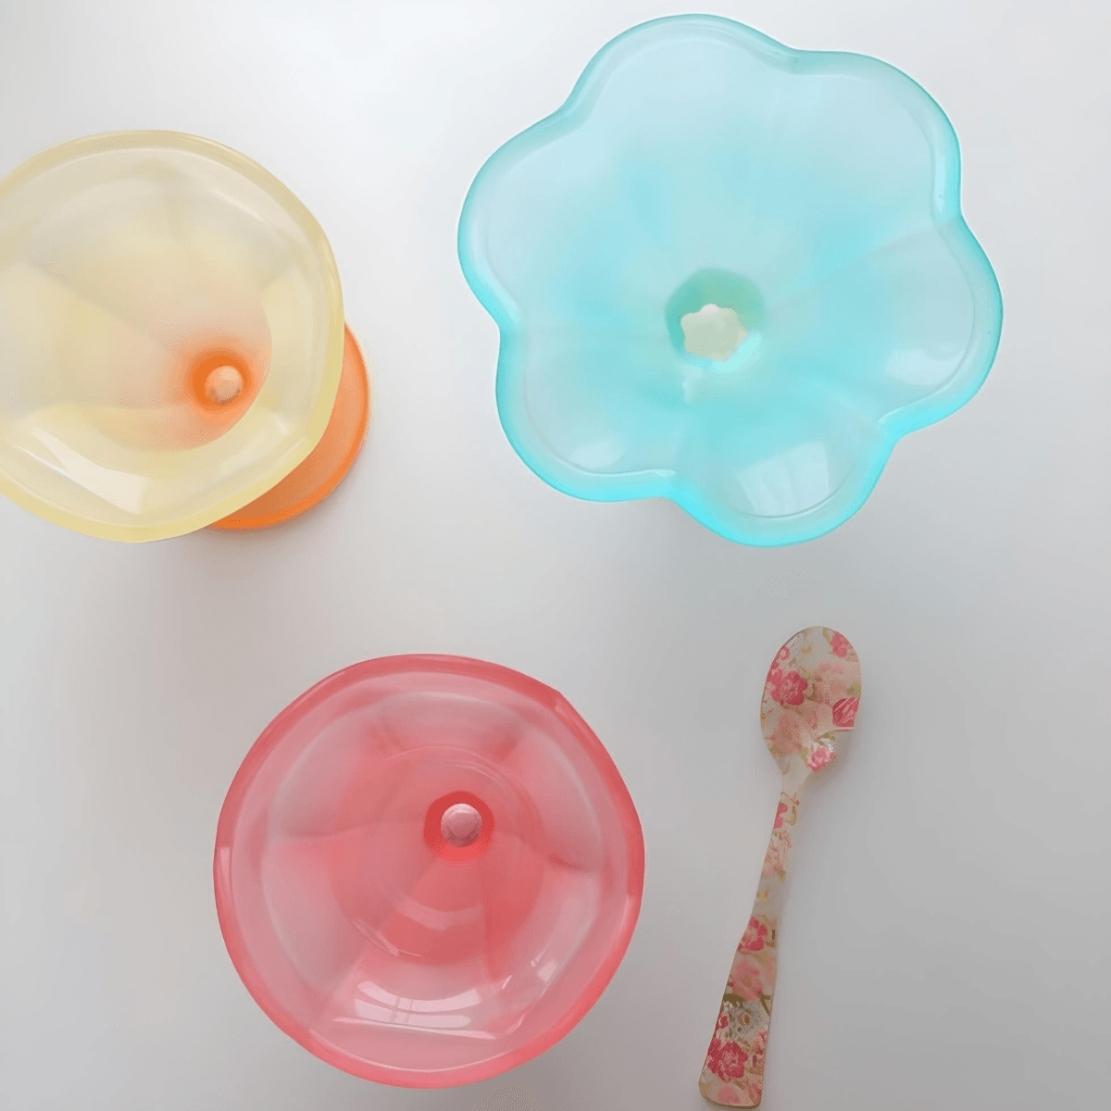 Yellow, blue & pink frosted glass ice cream bowls